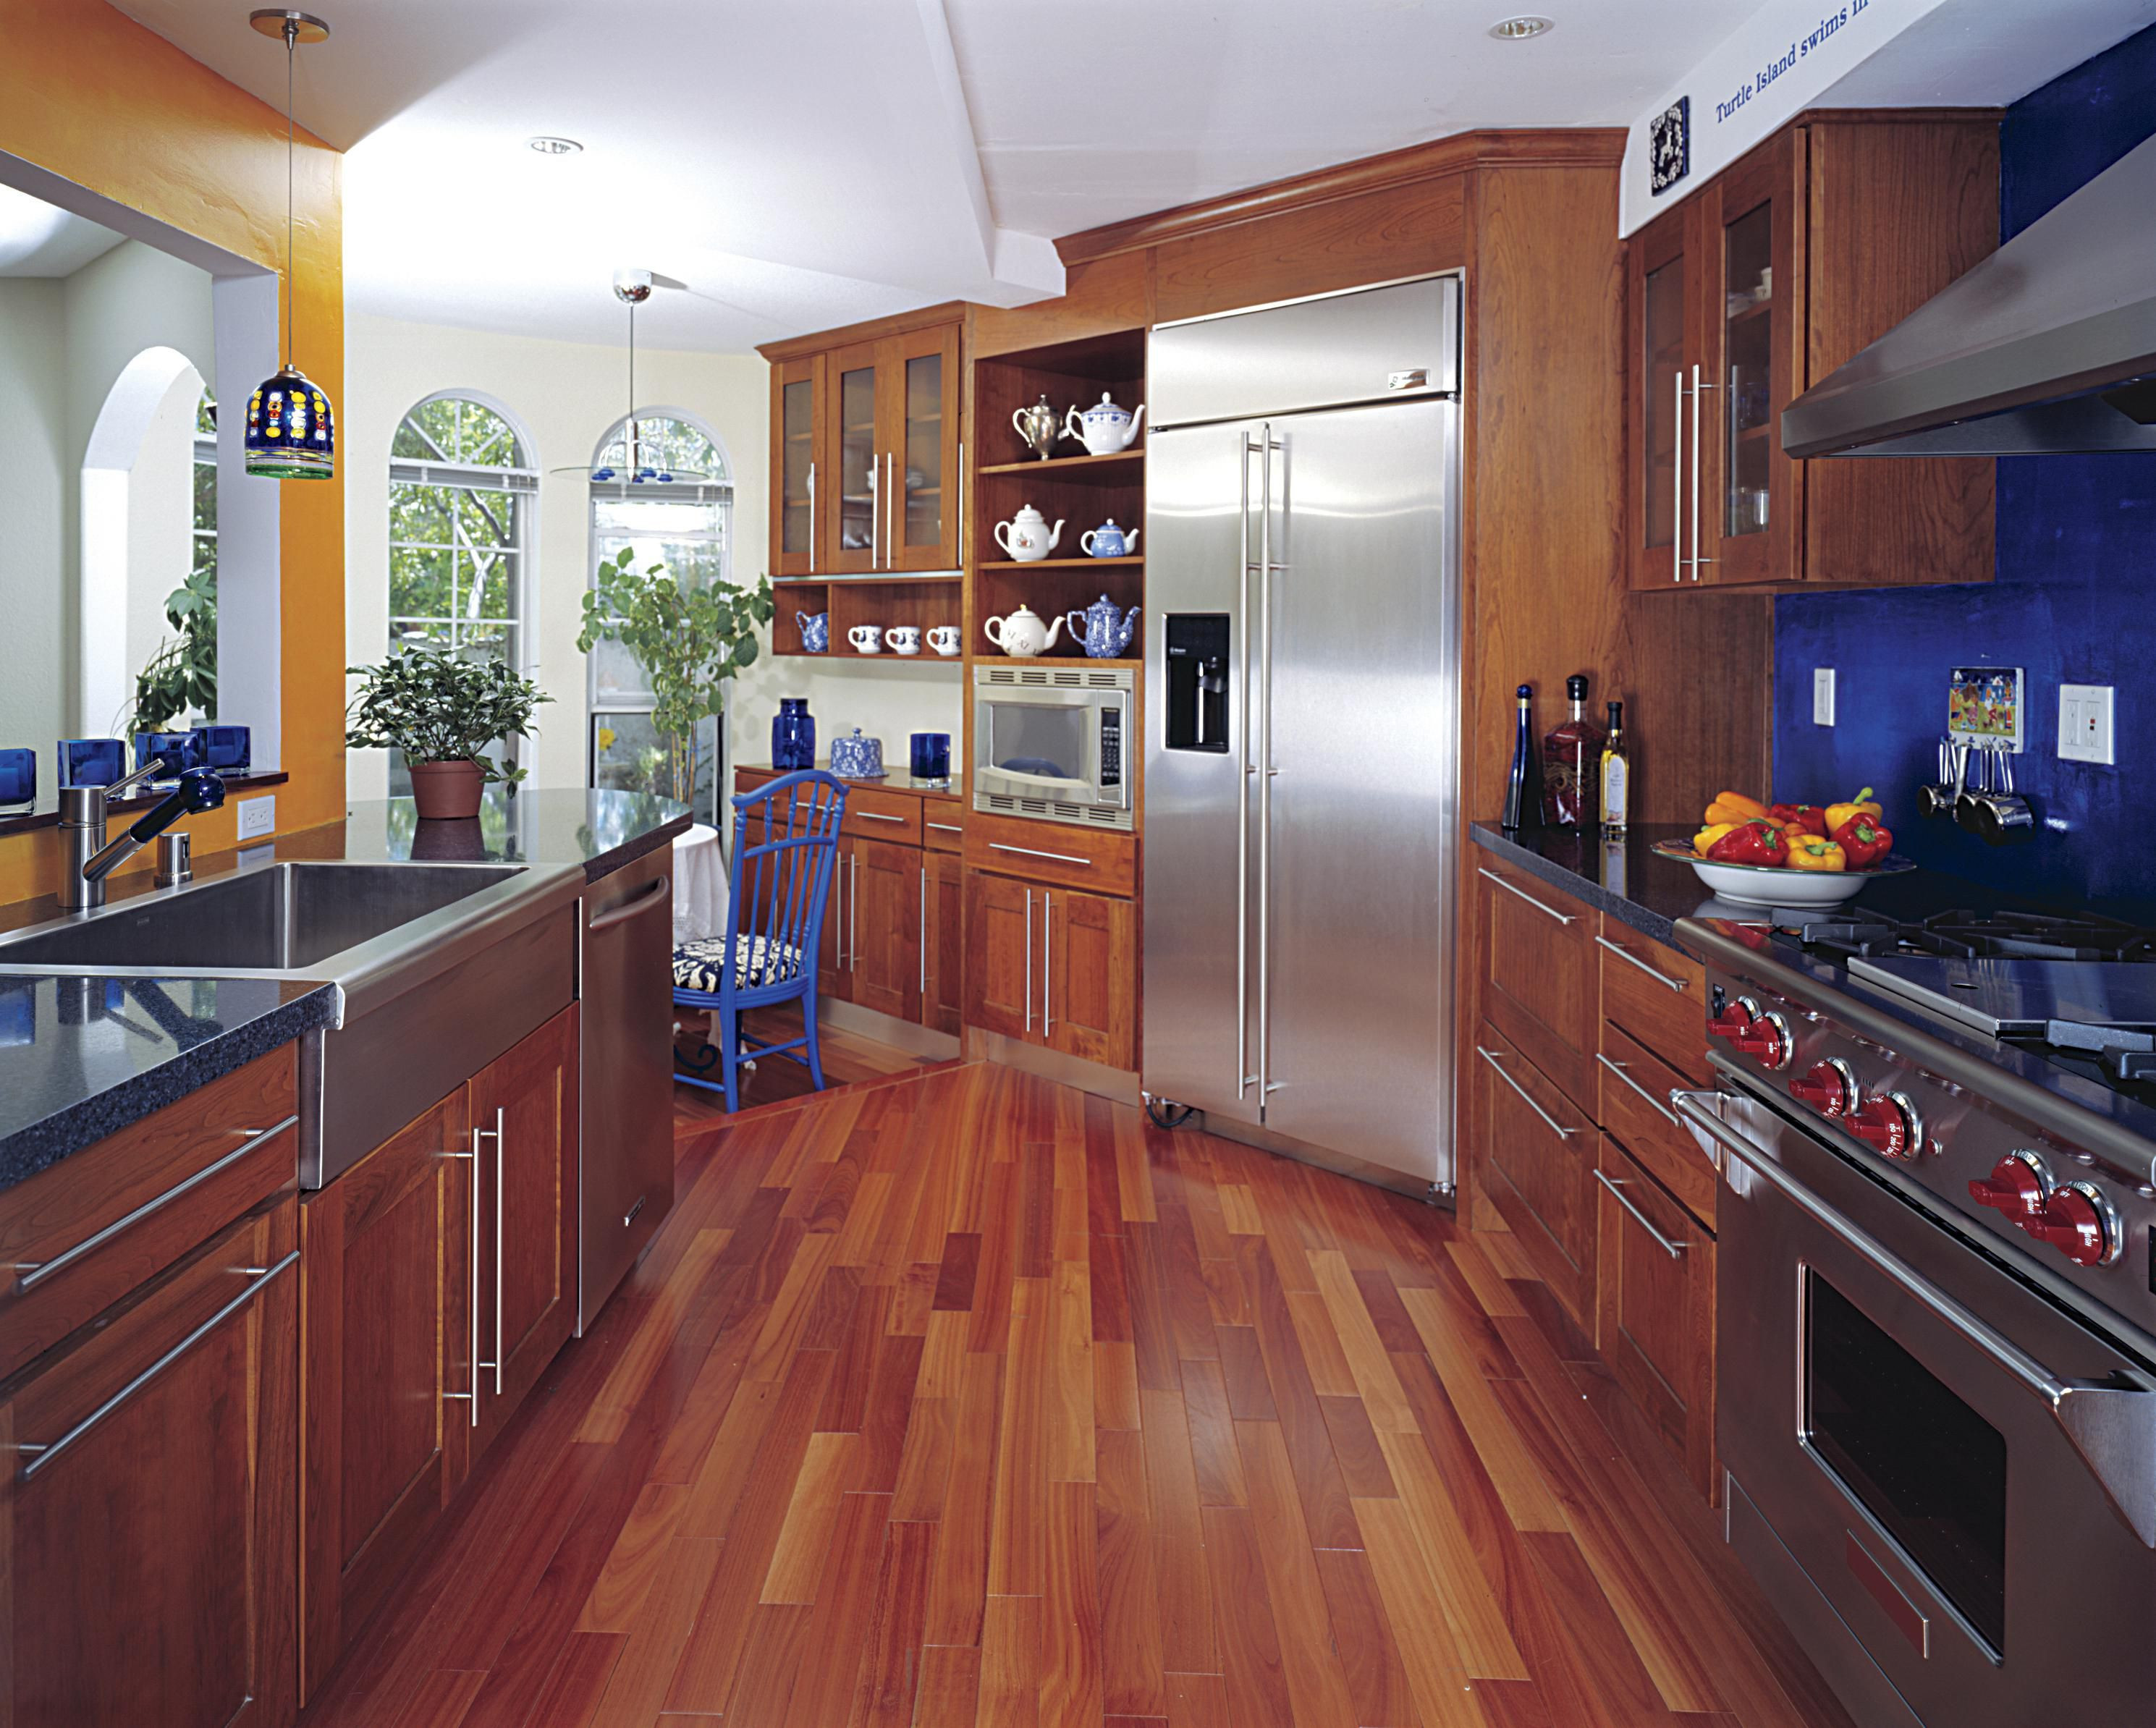 12 Famous Prefinished Hardwood Flooring Prices 2024 free download prefinished hardwood flooring prices of hardwood floor in a kitchen is this allowed regarding 186828472 56a49f3a5f9b58b7d0d7e142